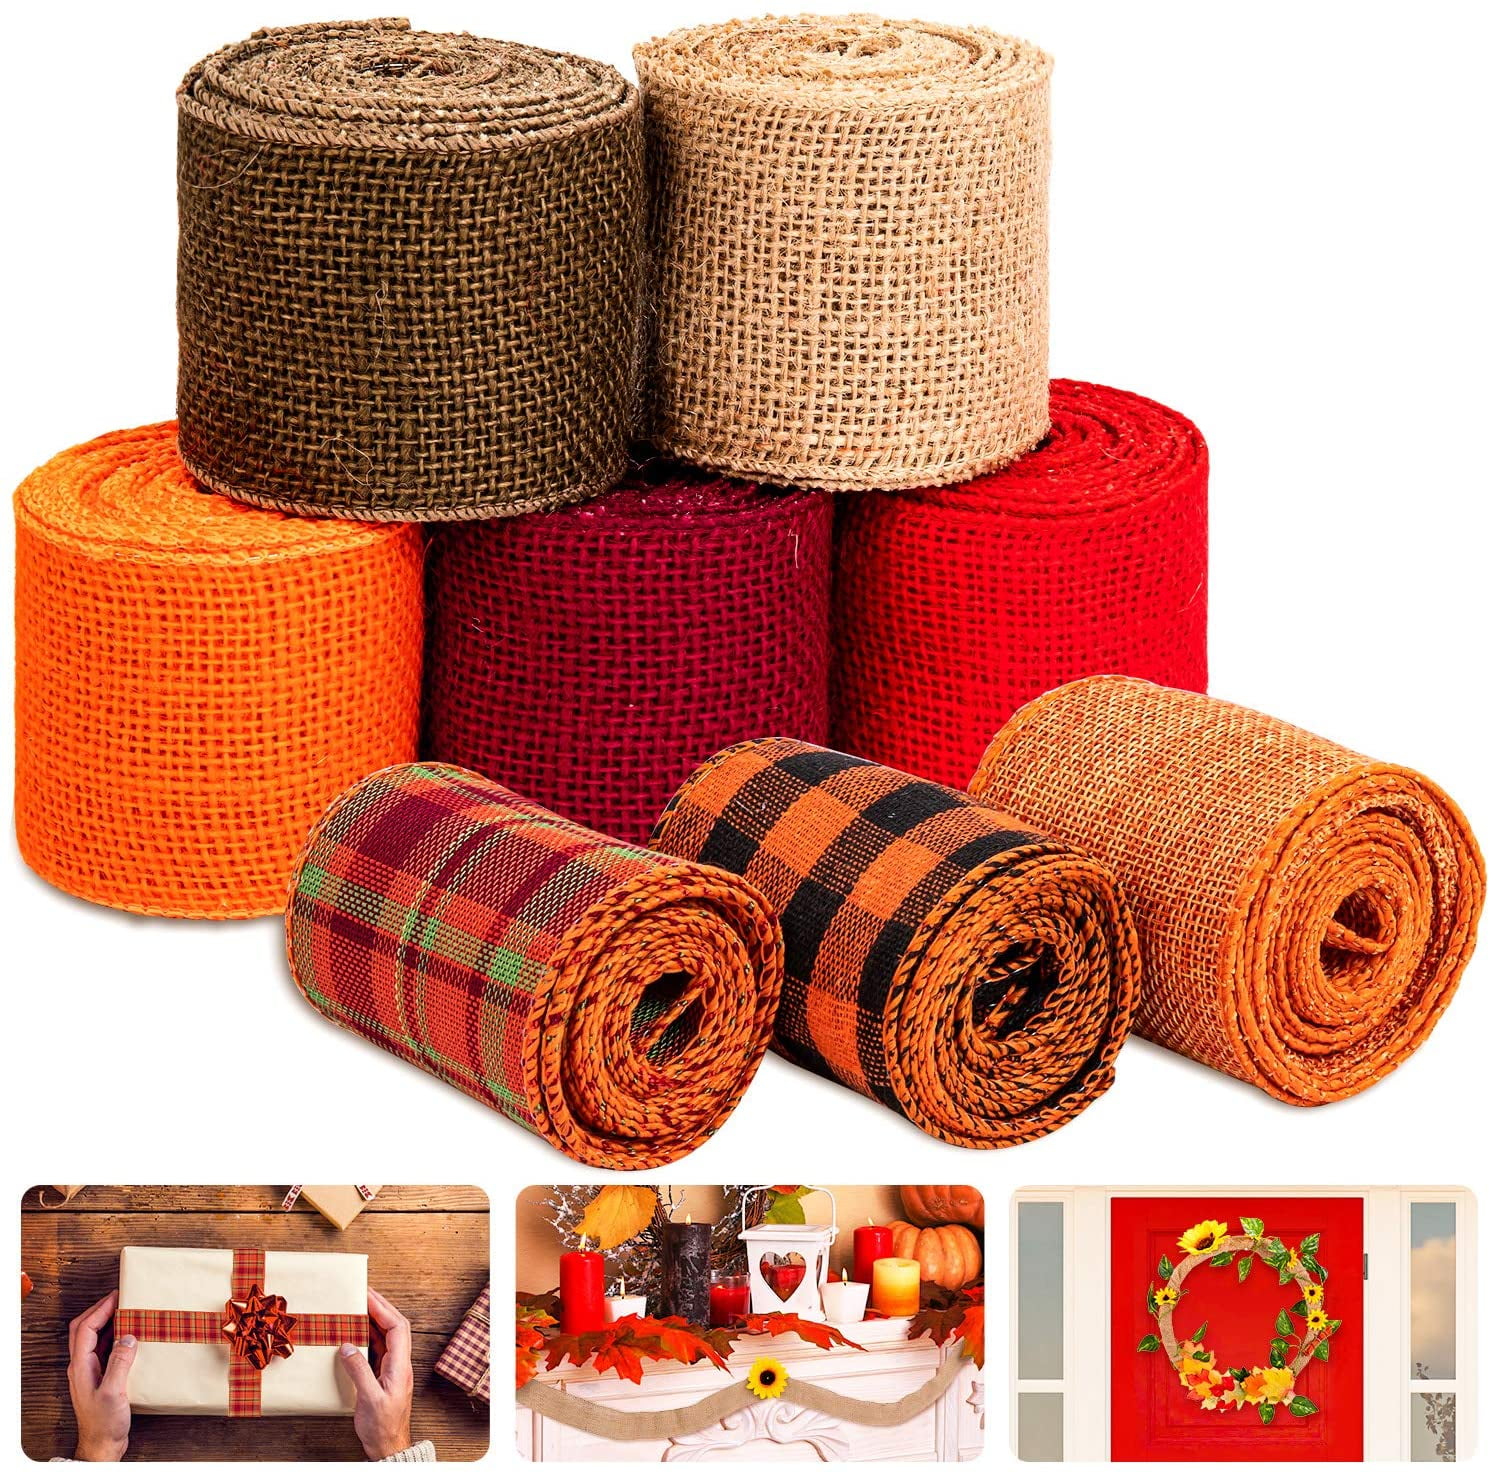 Details about   Red 5" burlap ribbon 5 yards roll wedding decor burlap wreath materials 